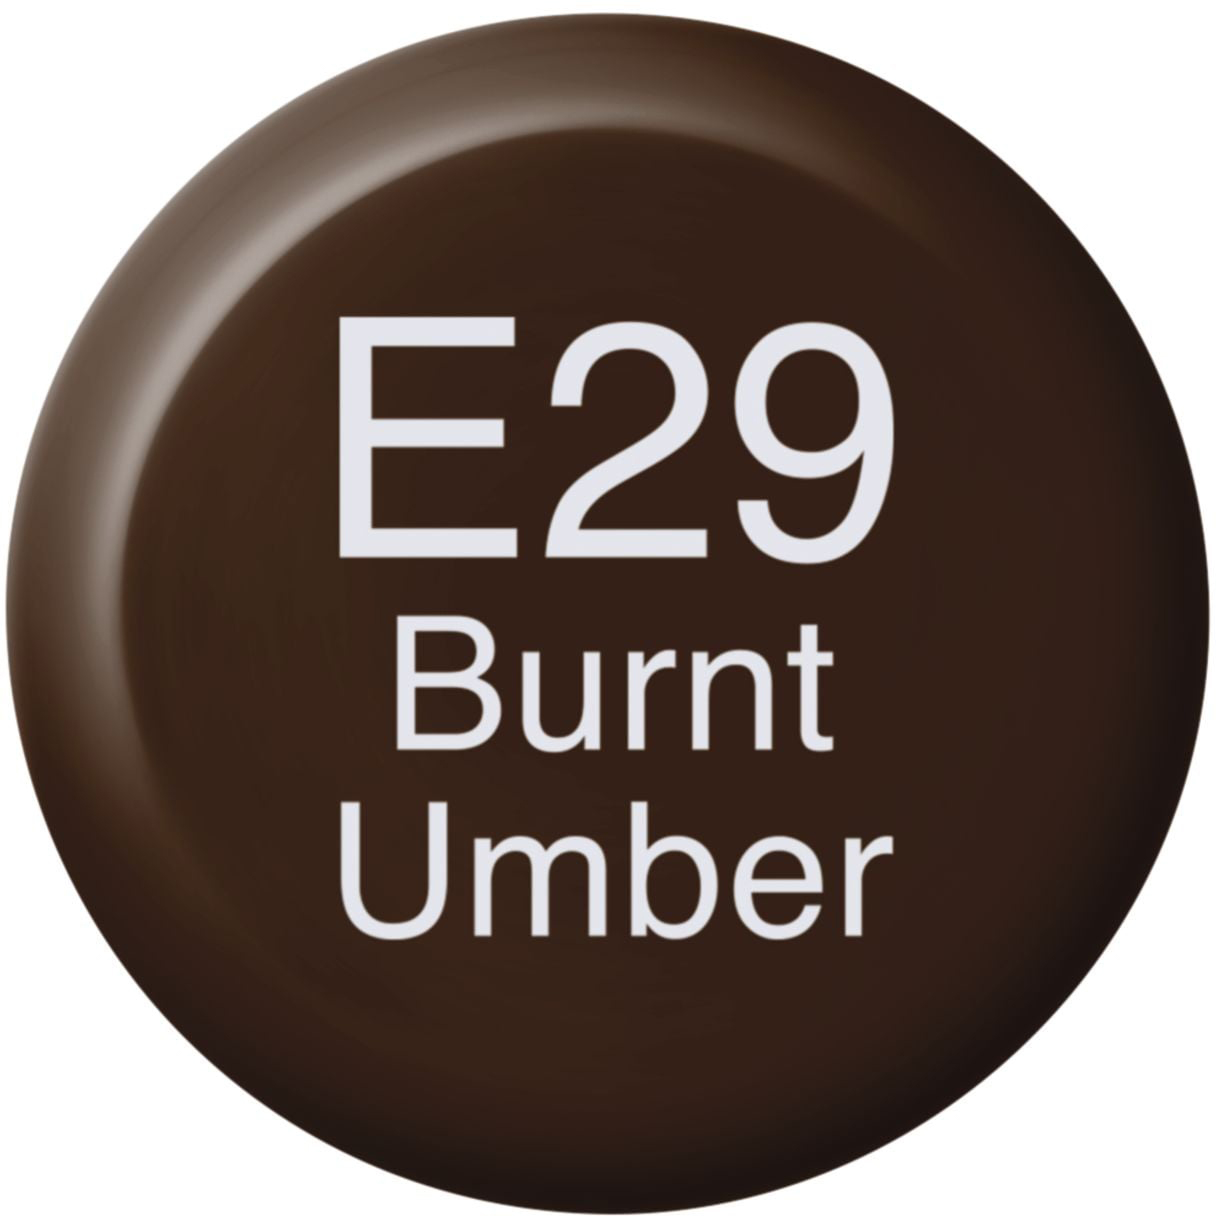 COPIC Ink Refill 2107642 E29 - Burnt Umber